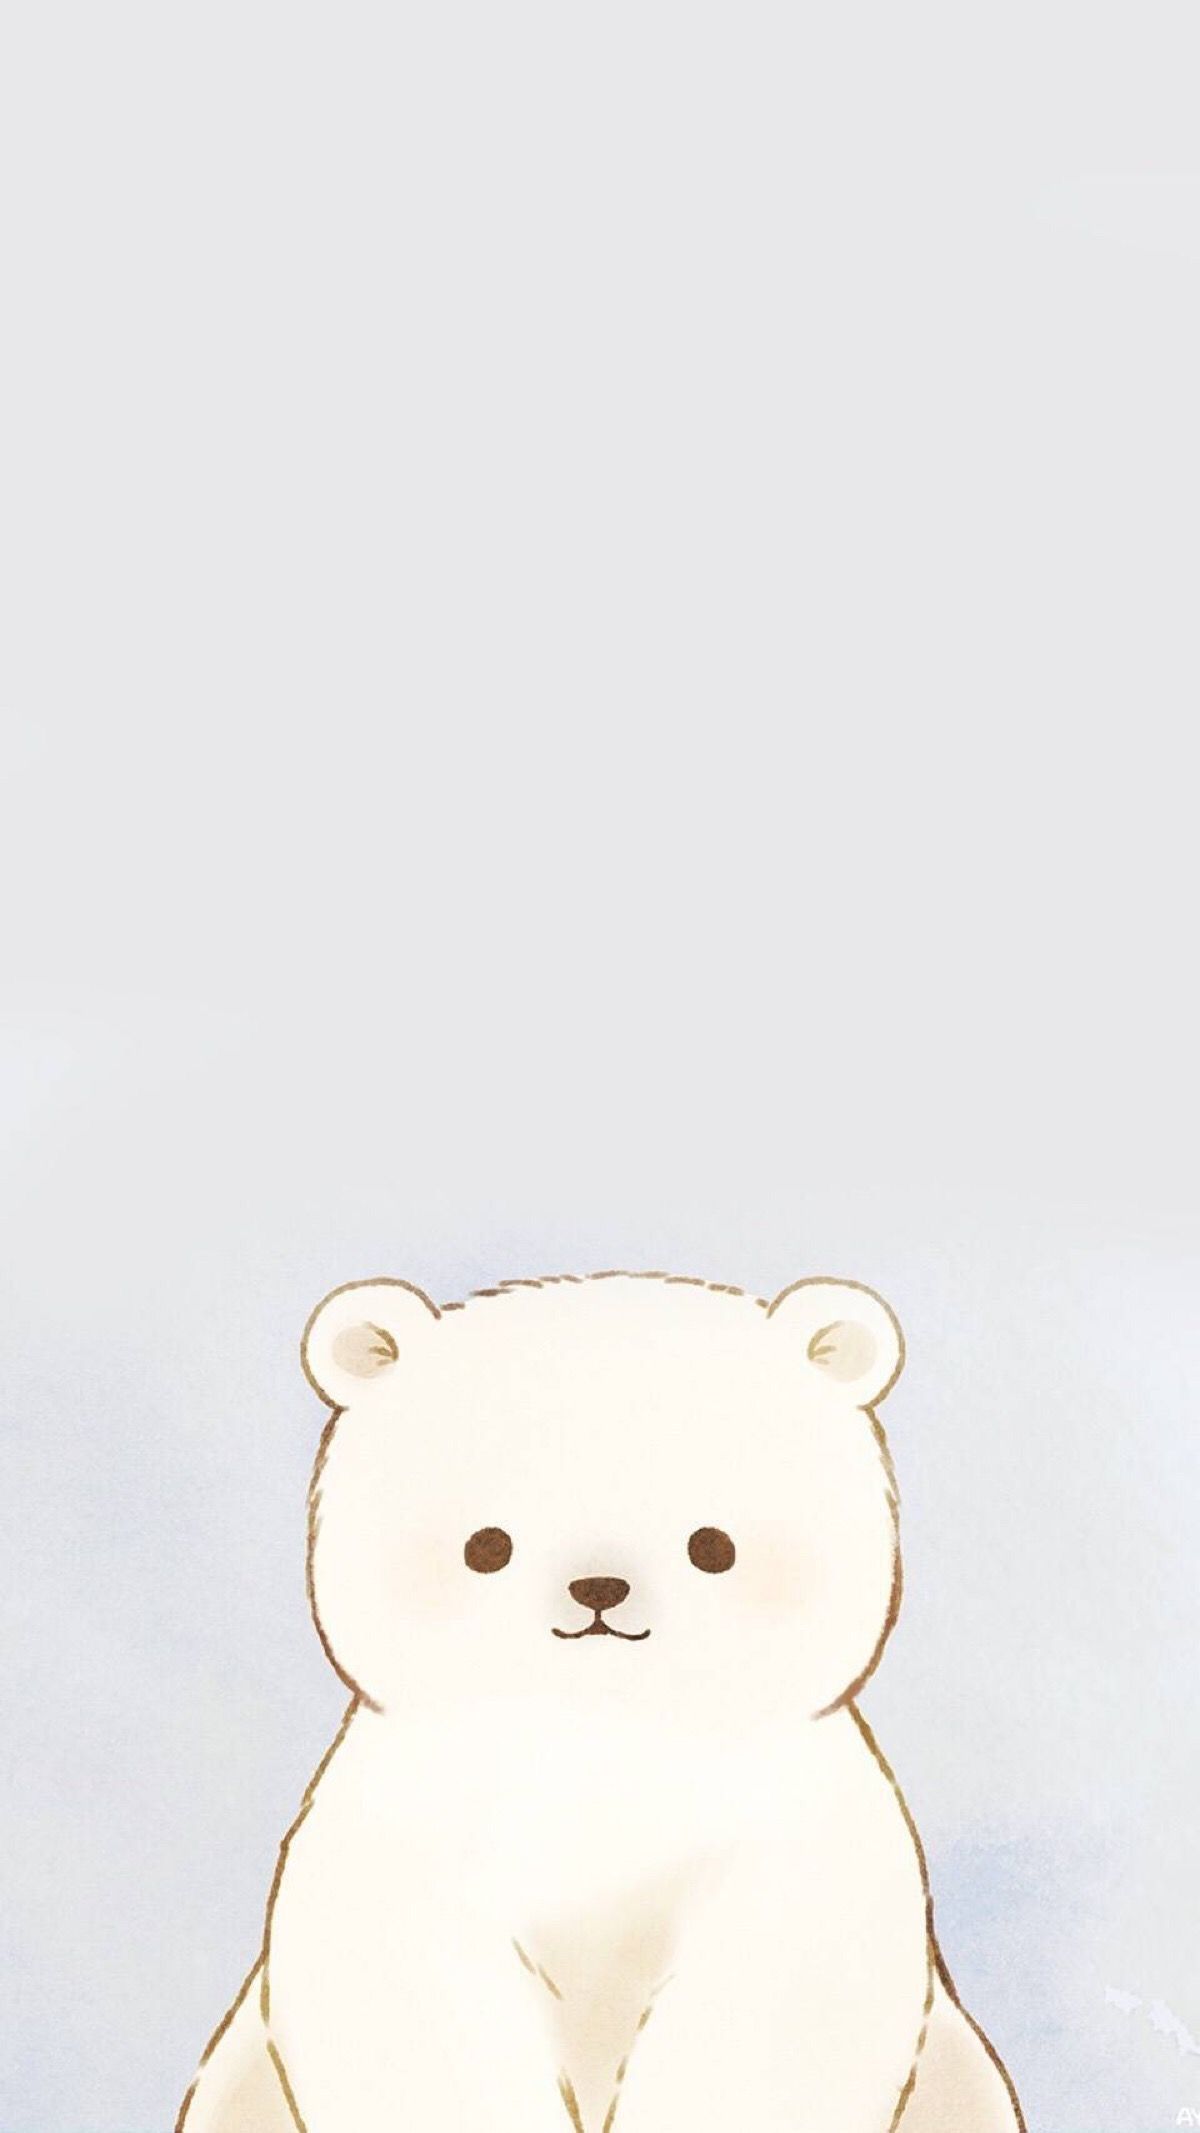 Cute Big Bear Cartoon Mobile Wallpaper Background Wallpaper Image For Free  Download  Pngtree